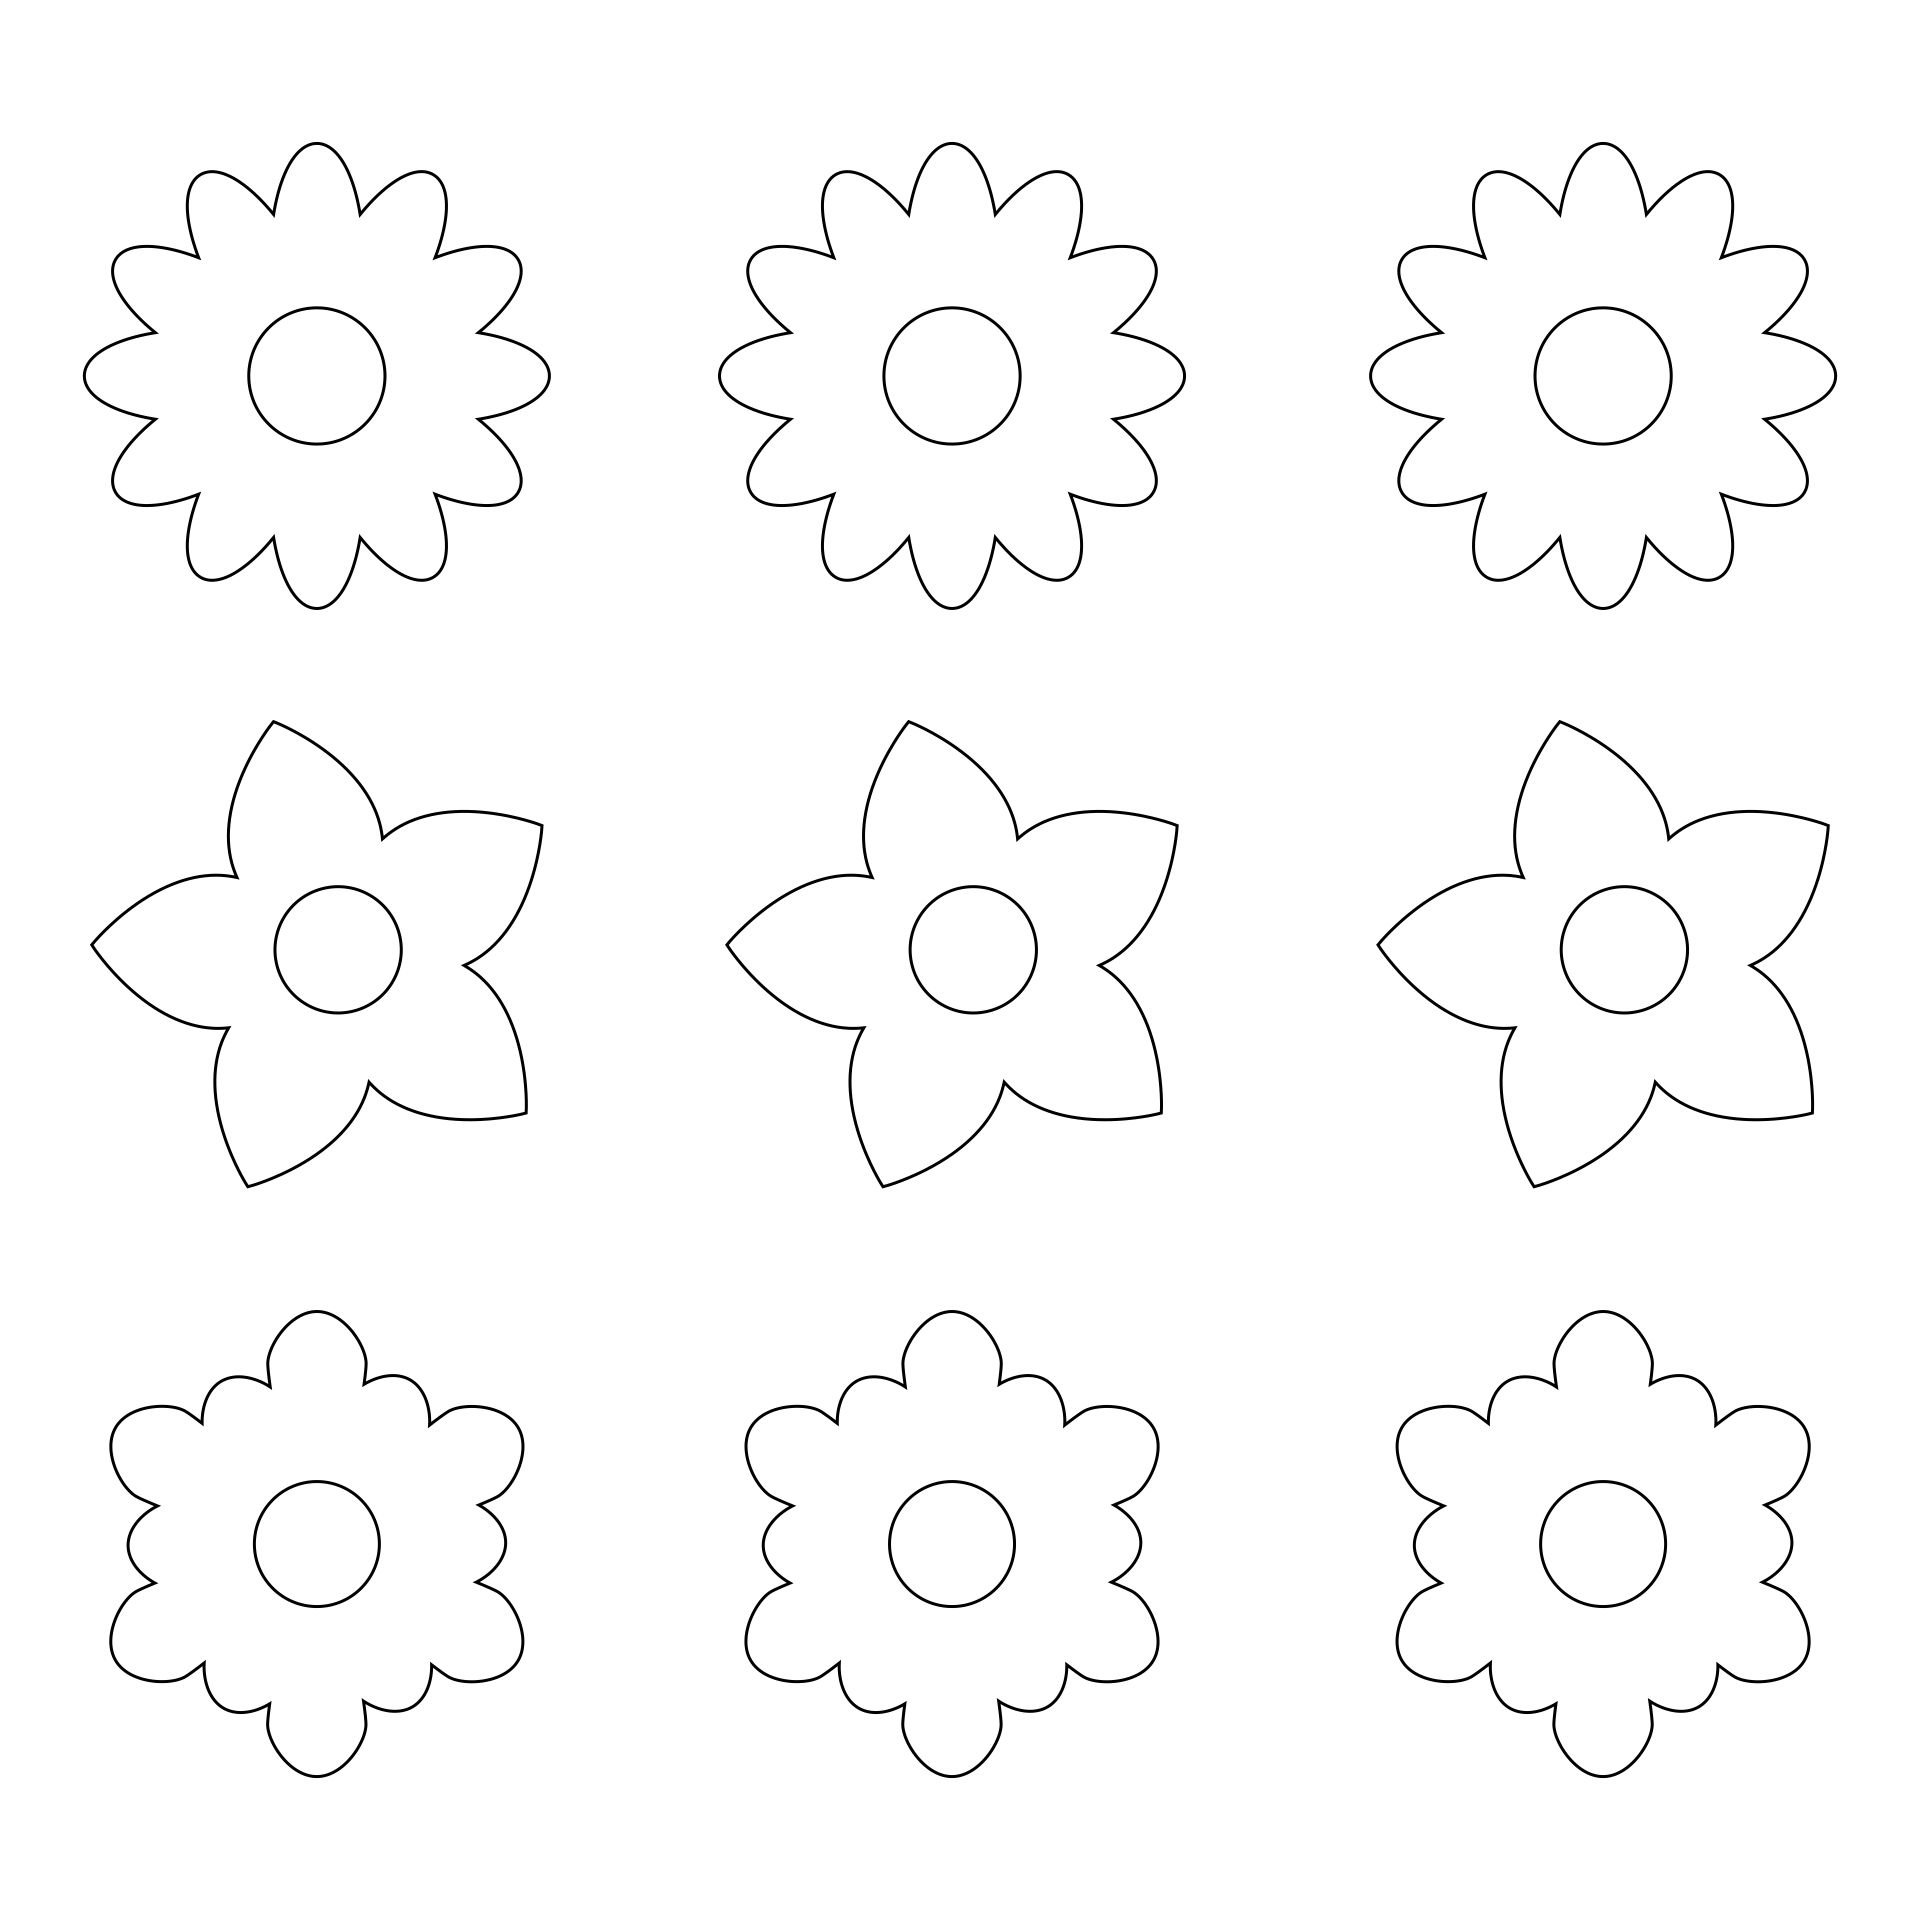 printable flower template cut out